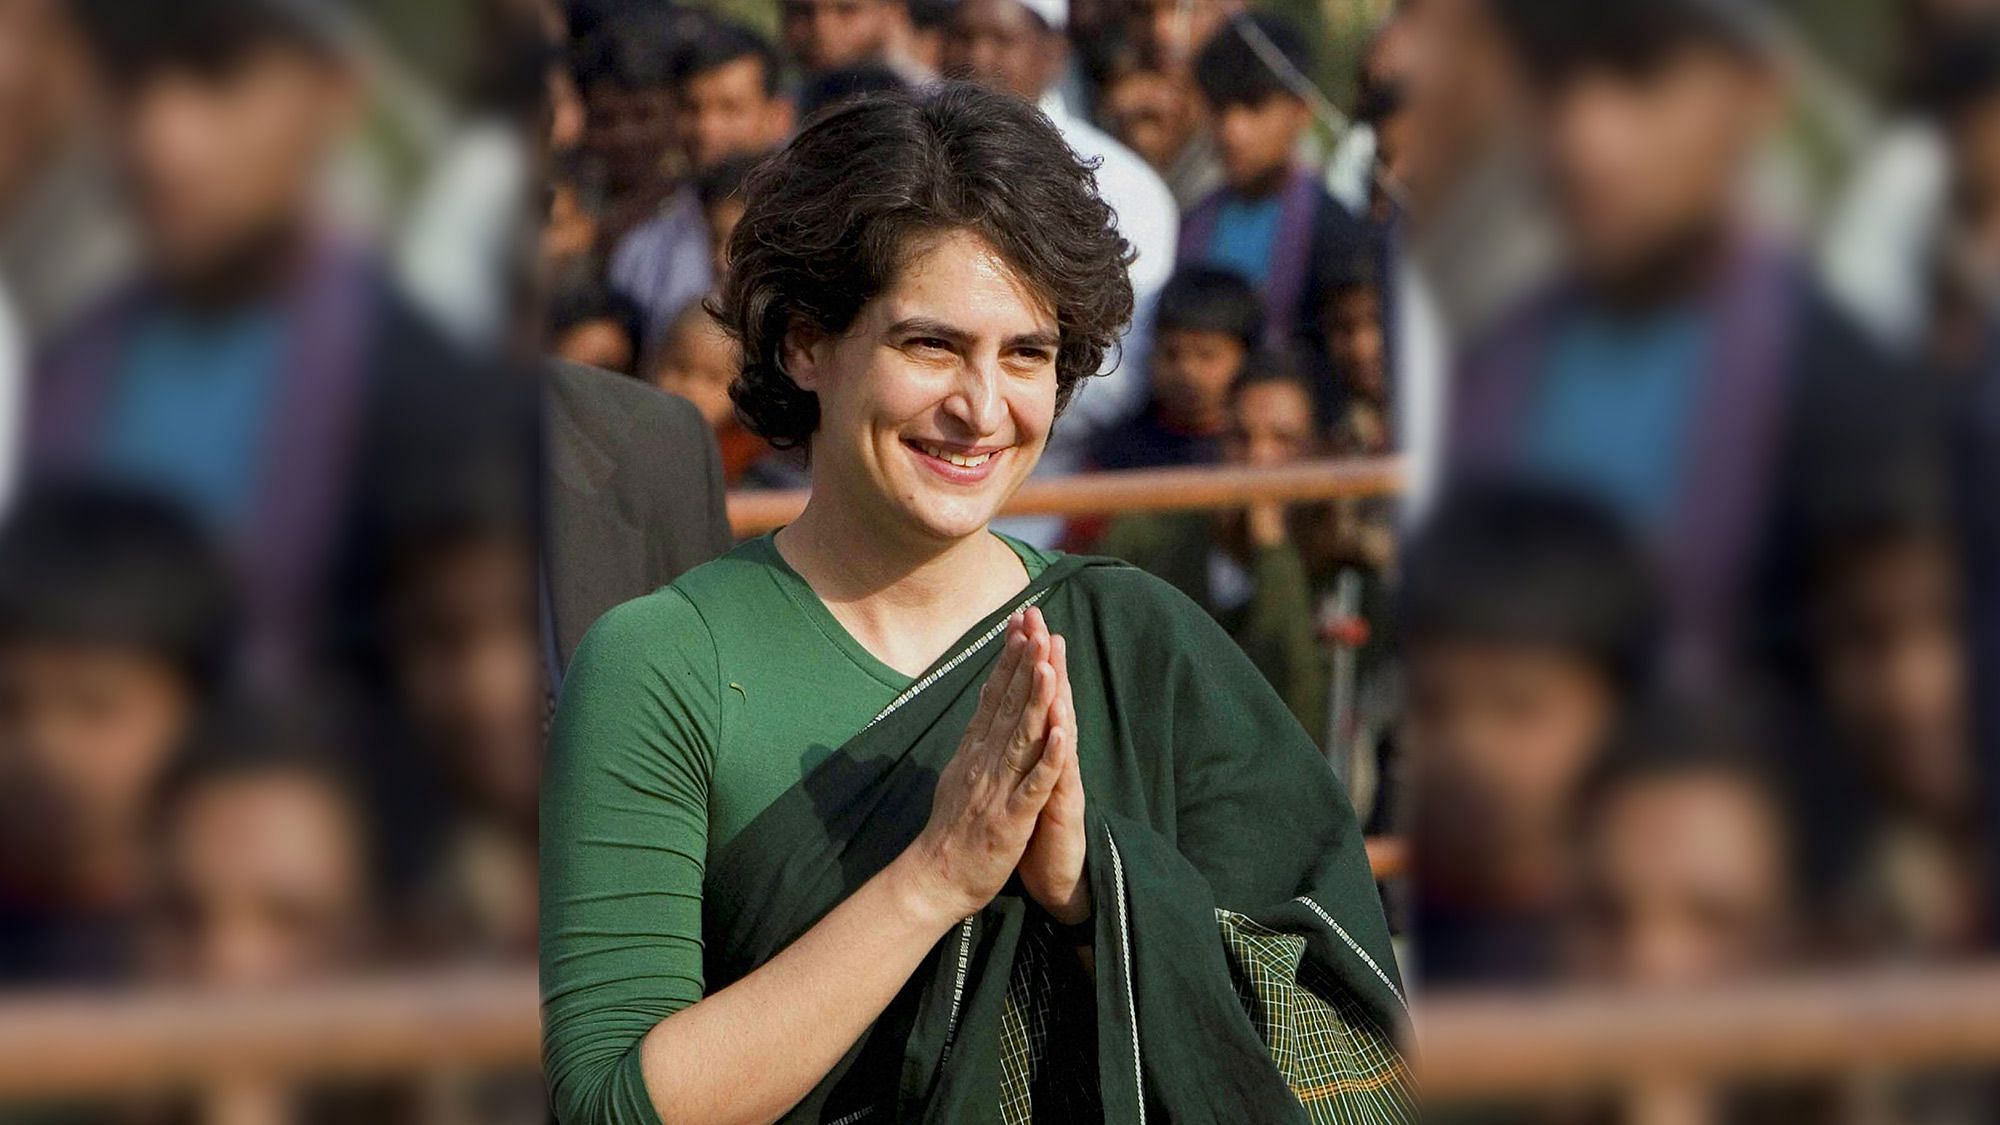 Speculation over Priyanka Gandhi’s electoral debut from Modi’s constituency ended on Thursday when the Congress fielded Ajay Rai from Varanasi.